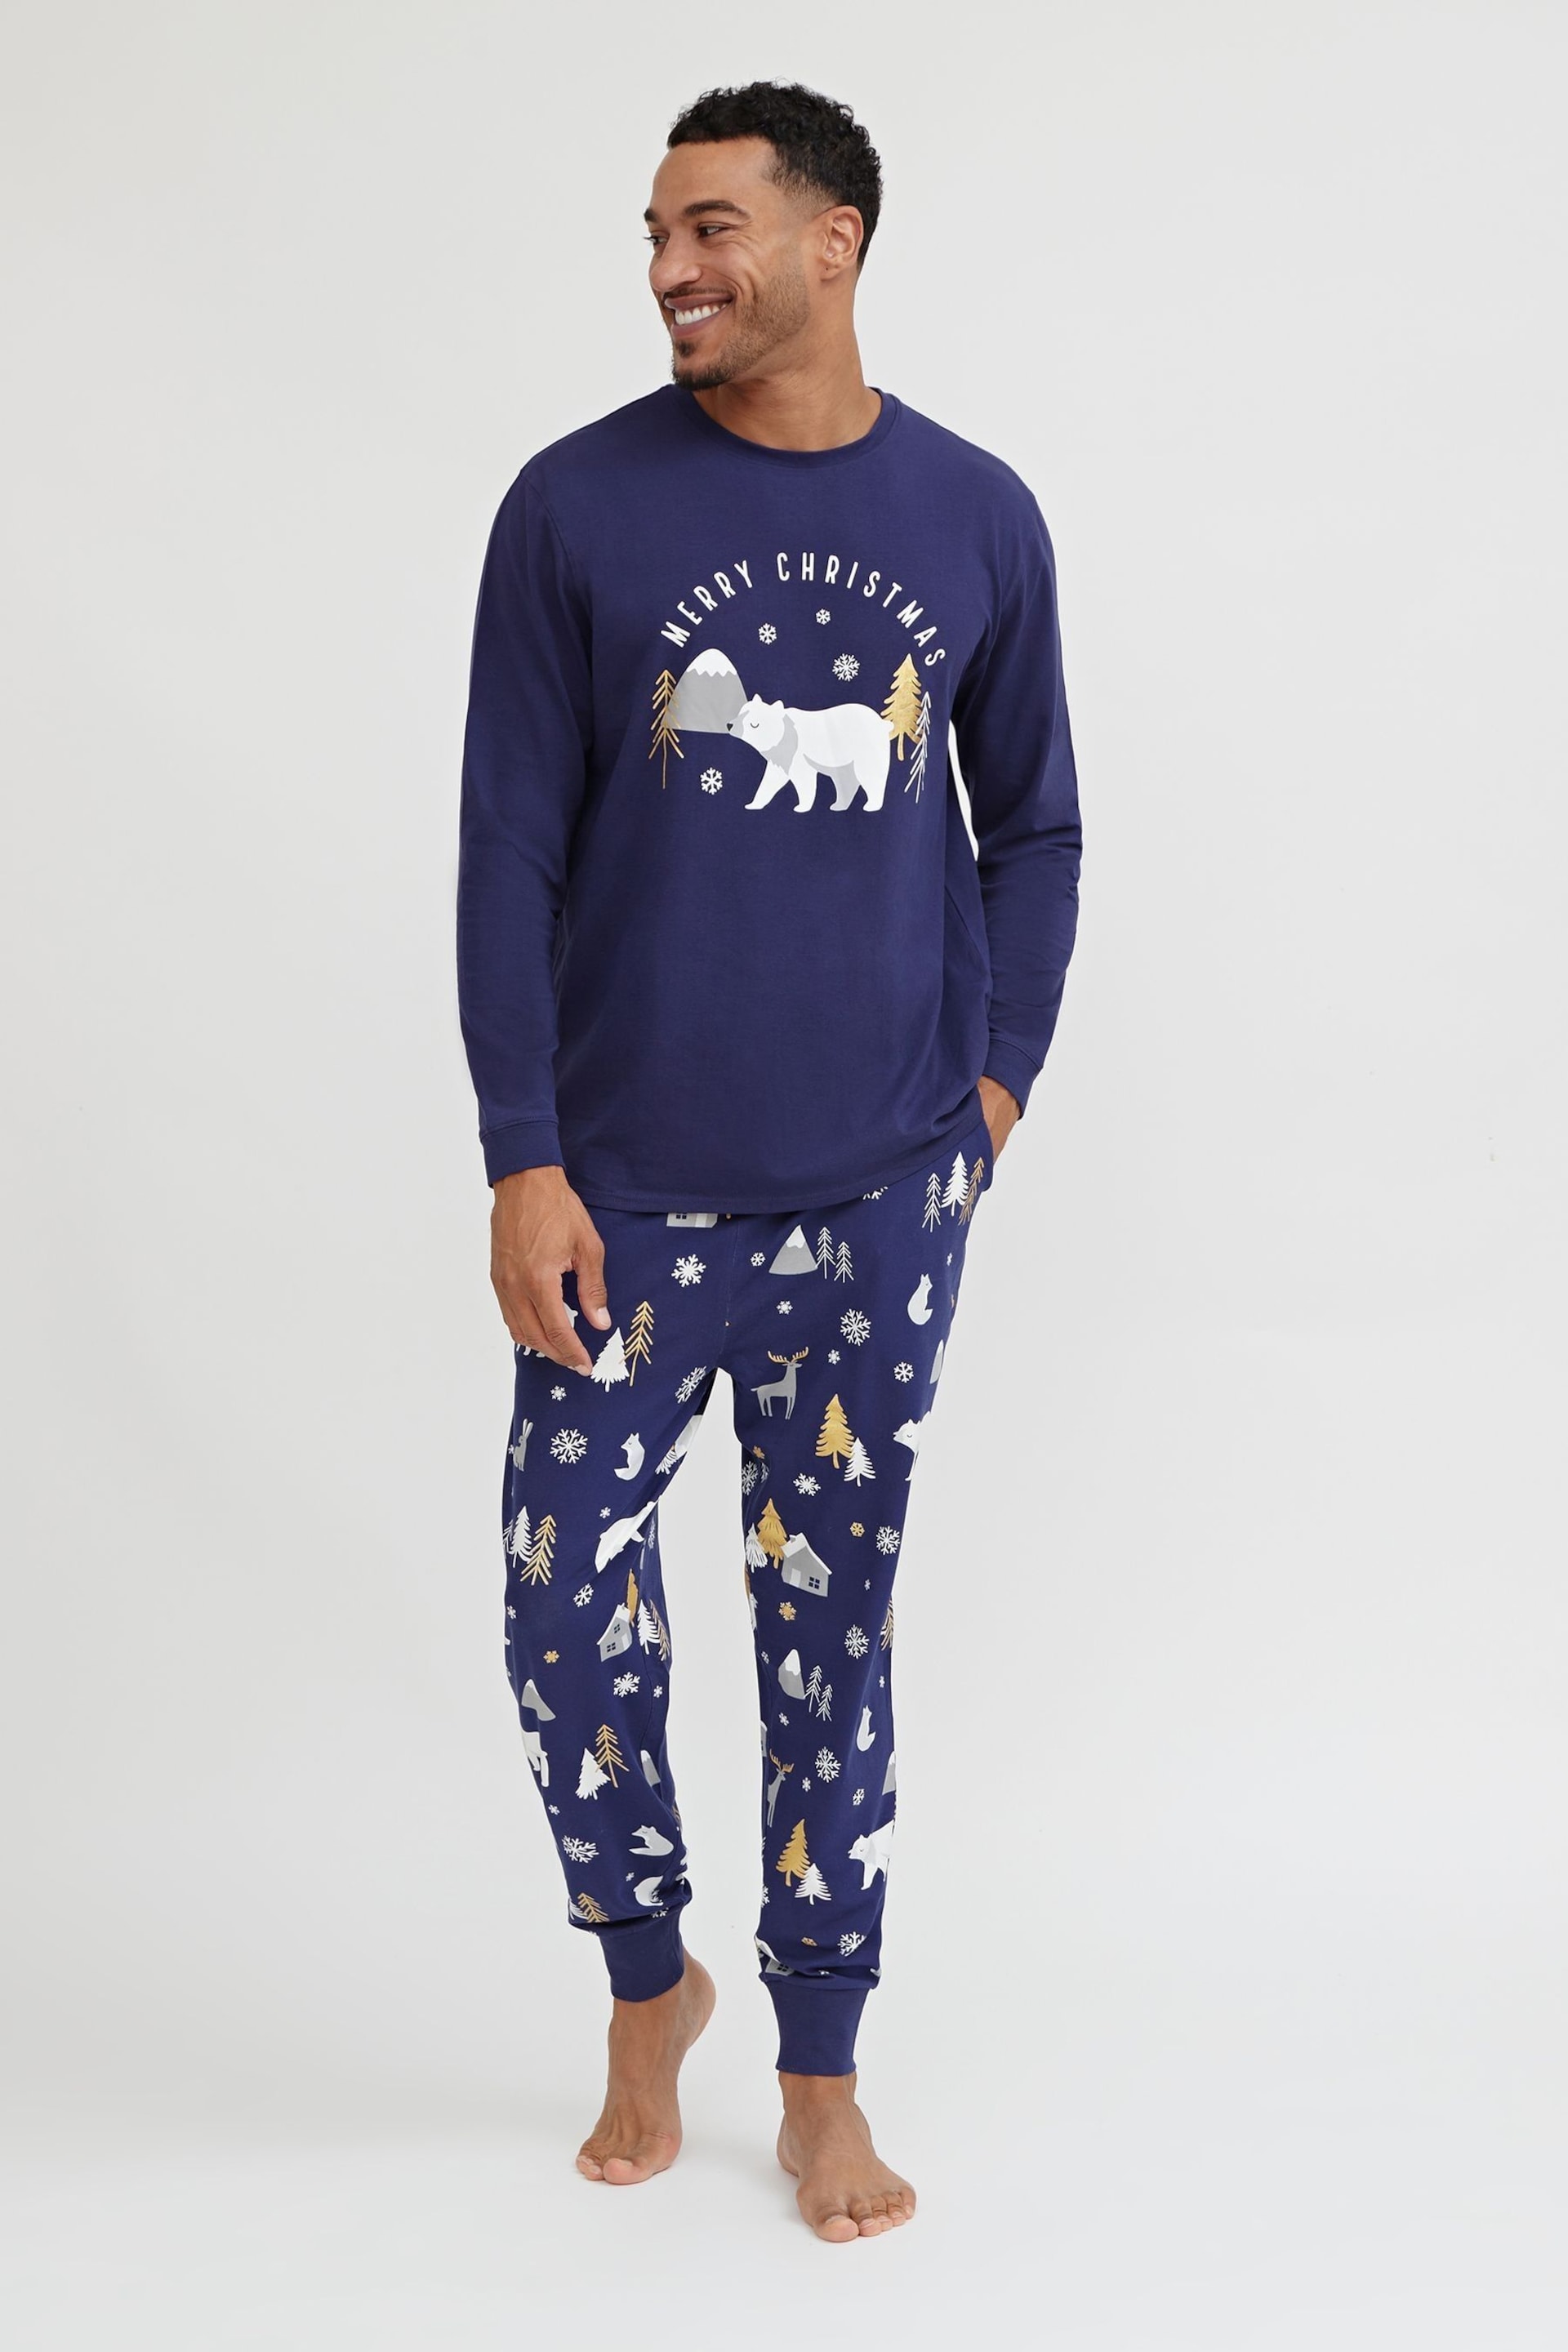 Society 8 Navy Forest Polarbear Matching Family Christmas Forest PJ Set - Image 1 of 5